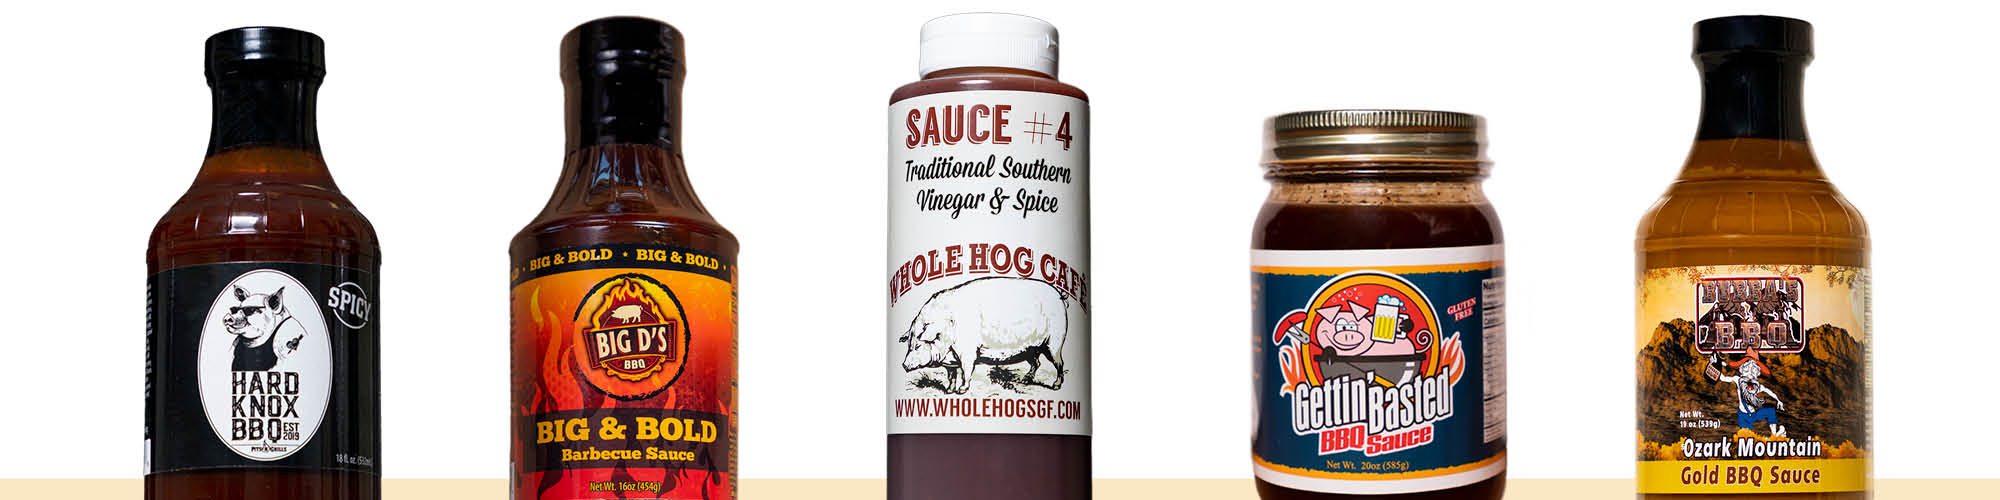 BBQ sauces from southwest MO BBQ restaurants